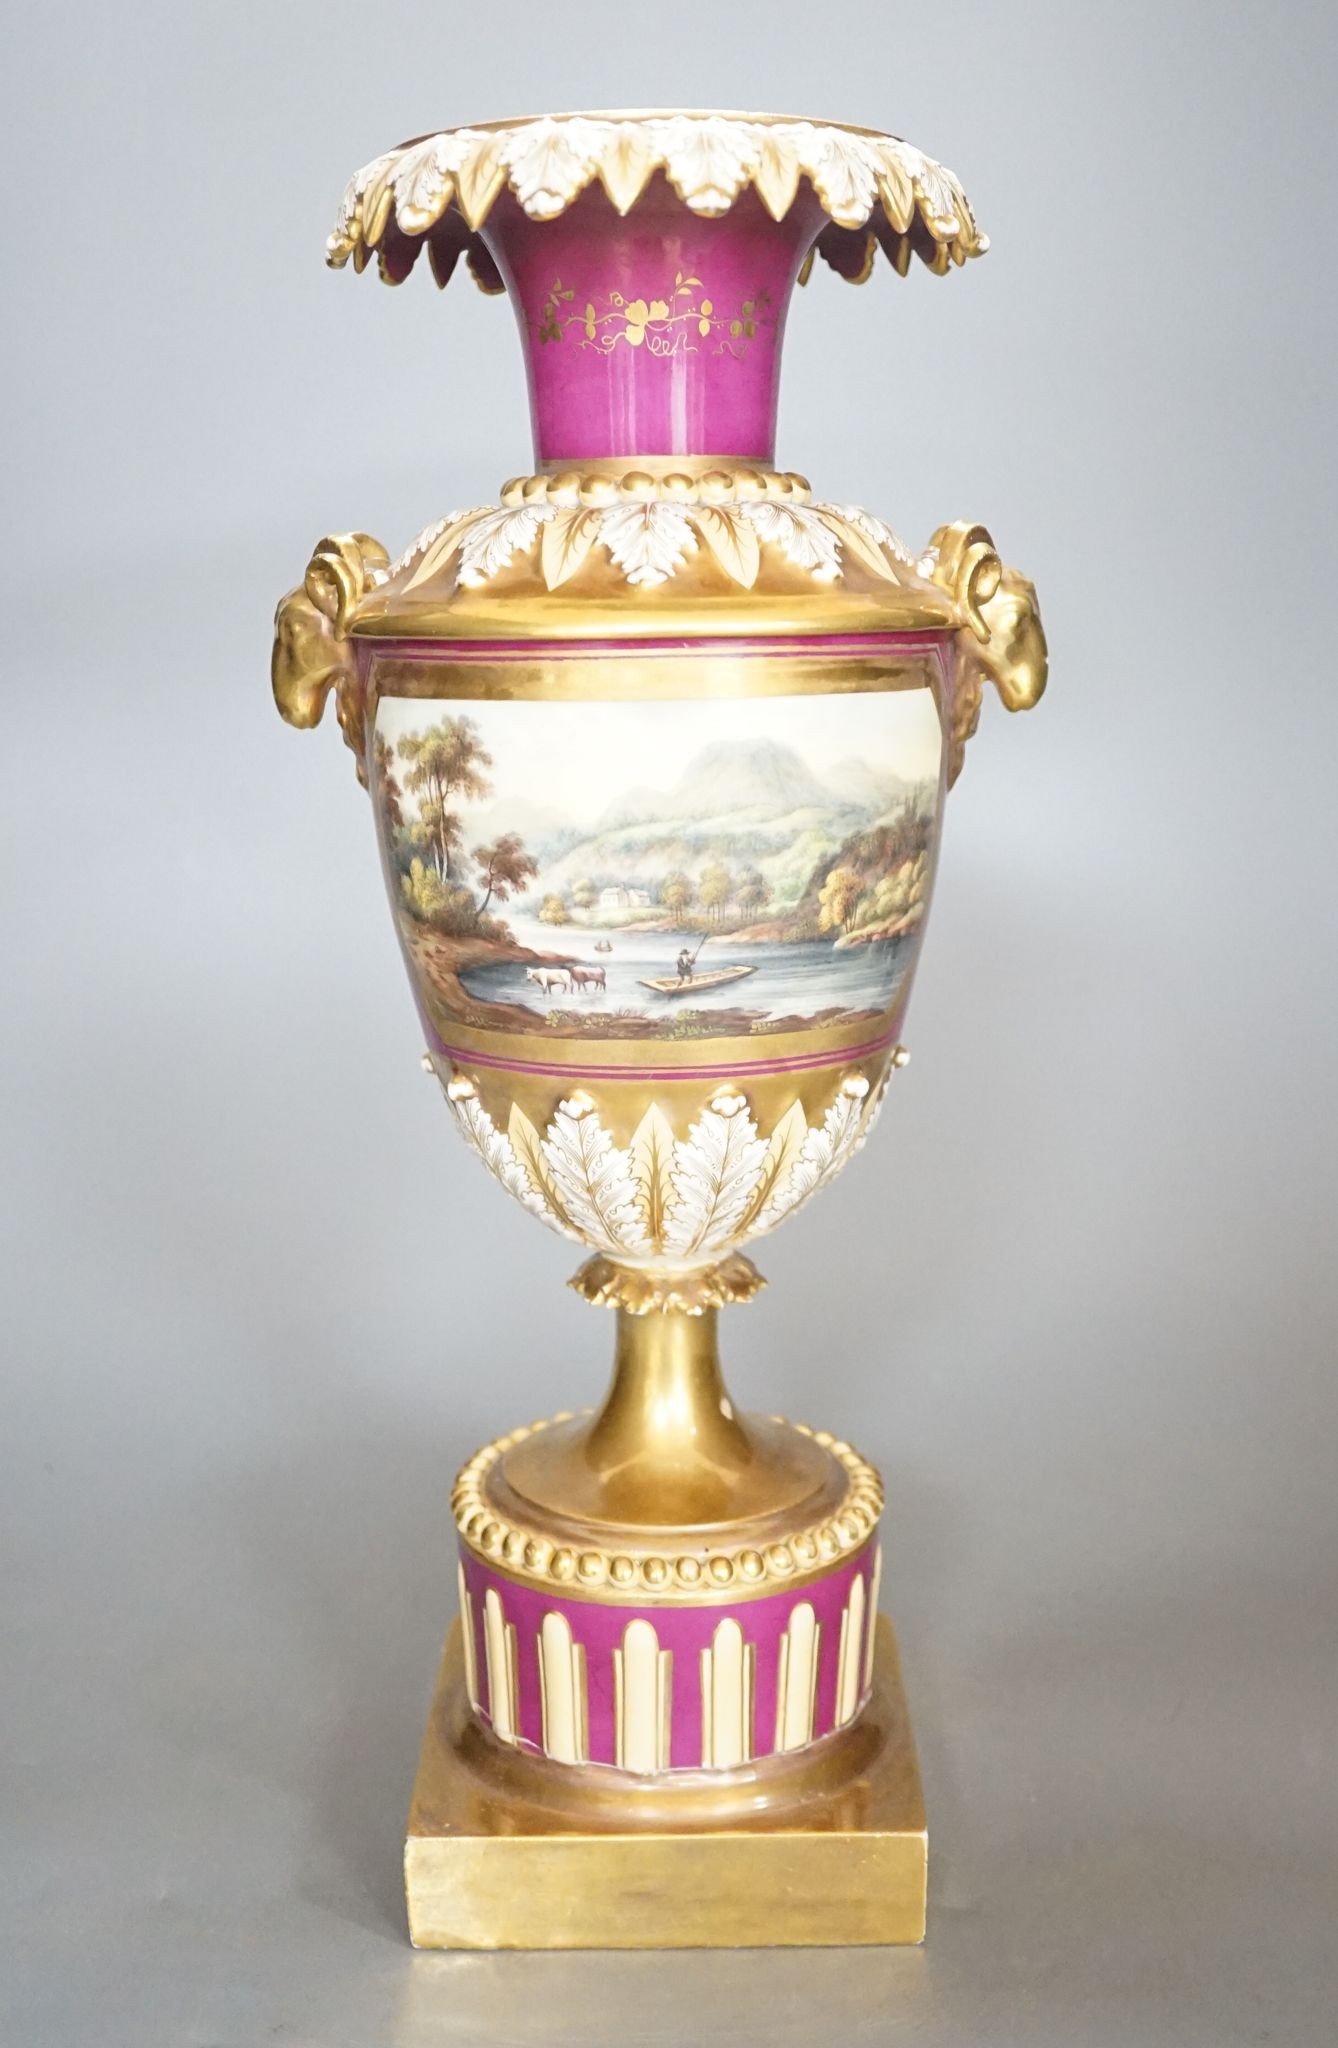 A 19th century English porcelain vase painted with a landscape on crimson ground, Worcester? 35cm